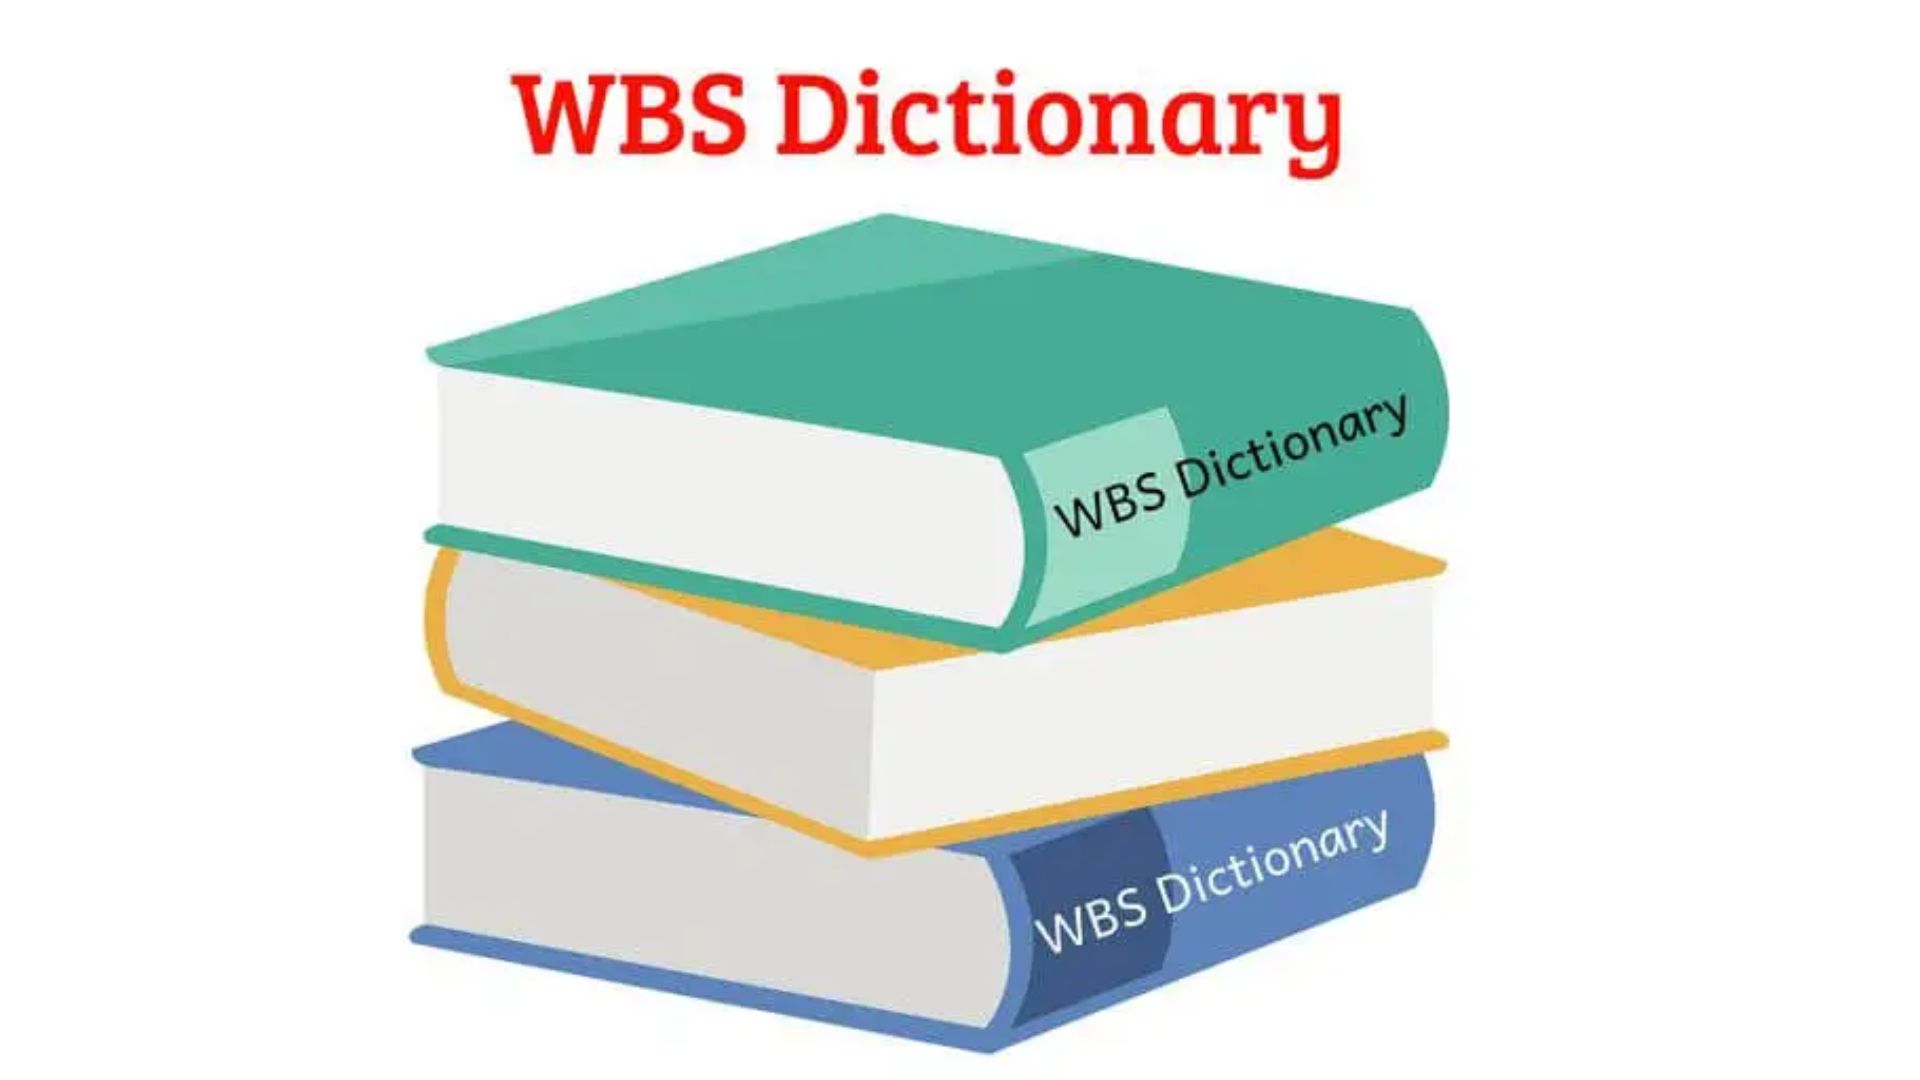 Knowing the WBS Dictionary